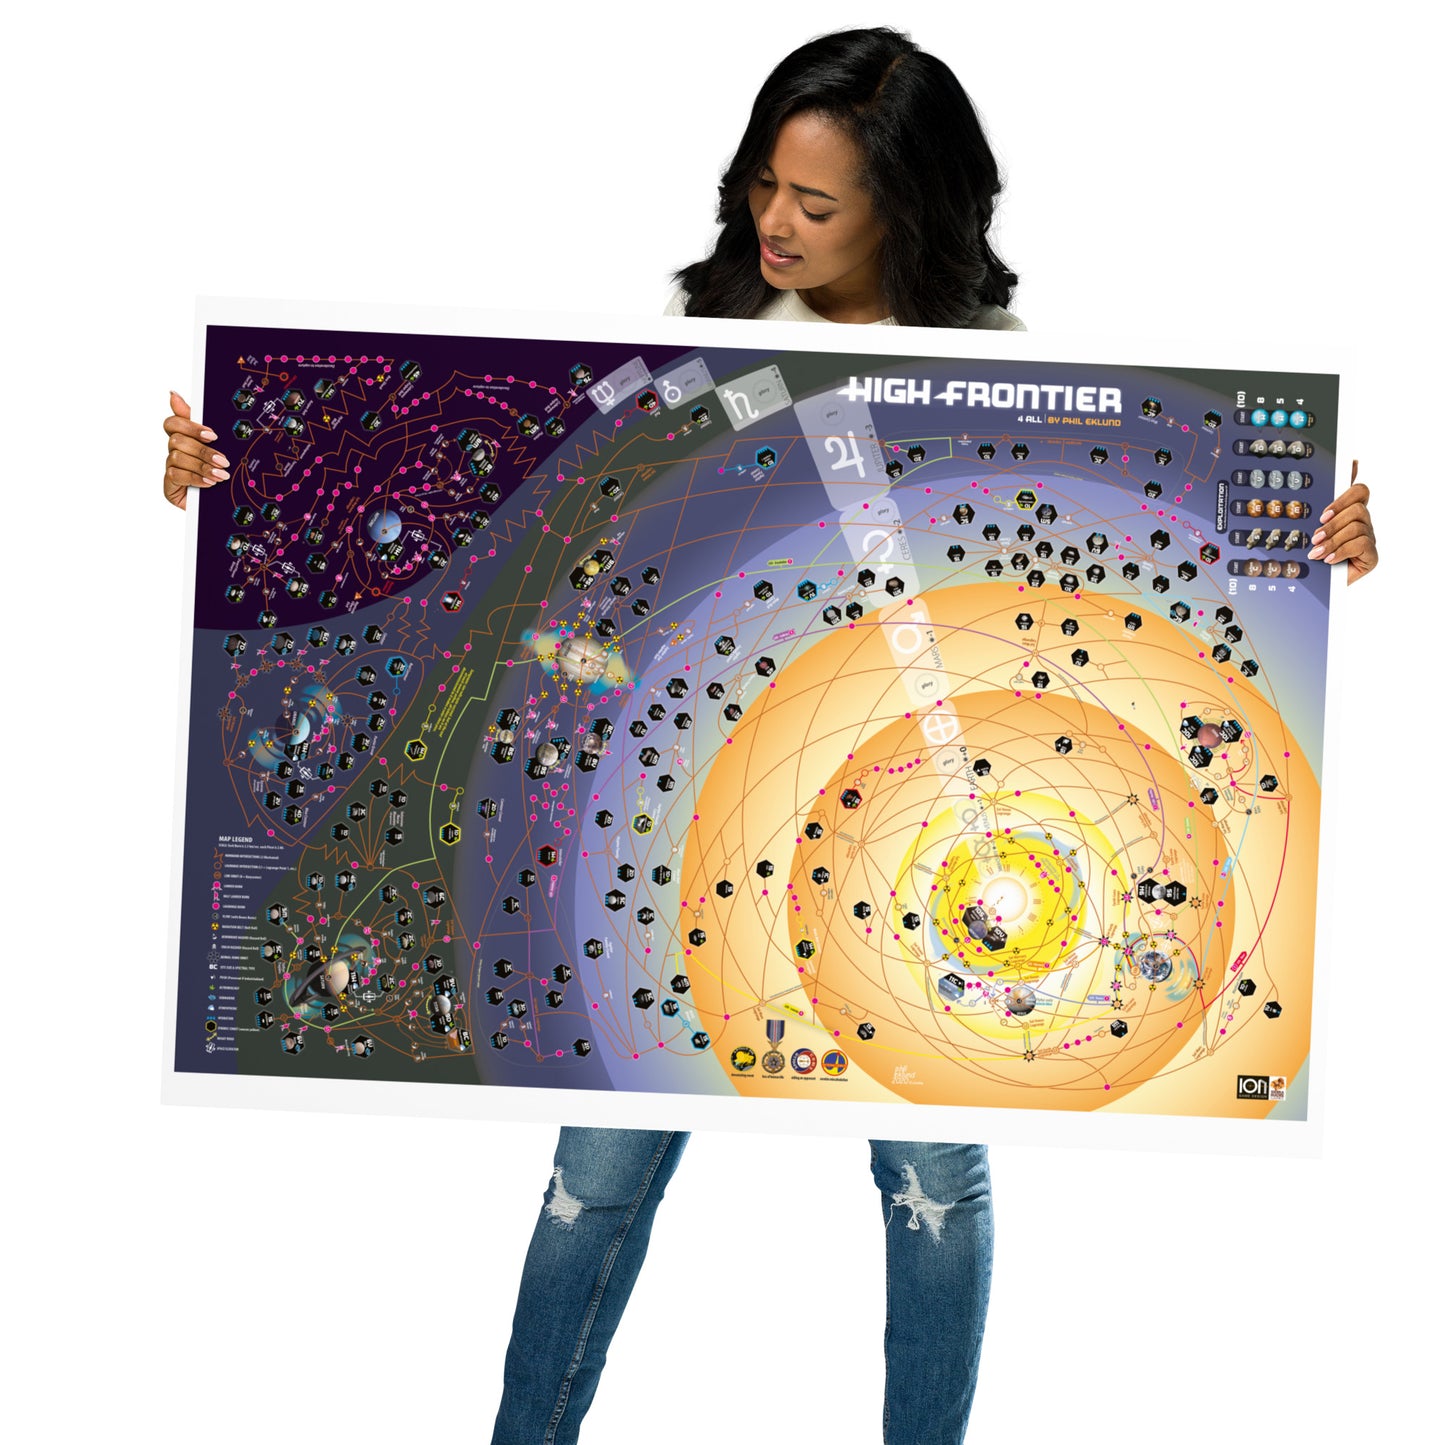 BIG Poster High Frontier 4 All Map 70 x 100 cm